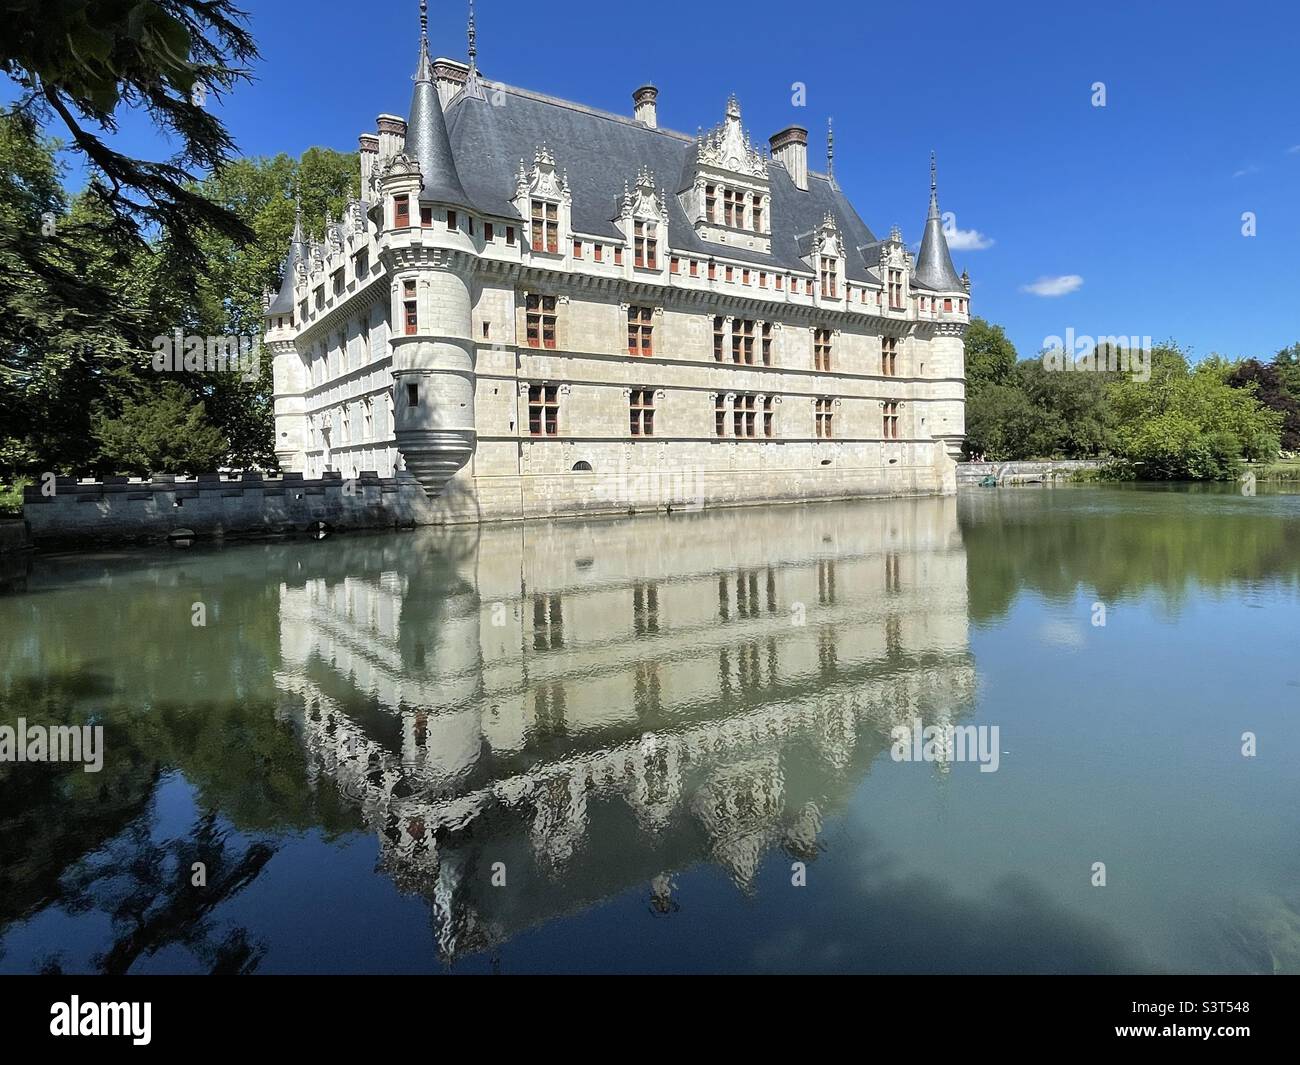 The Château of Azay-Le-Rideau reflected in the still waters of the Indre river, a jewel of the Touraine region of France’s UNESCO-listed Loire Valley Stock Photo